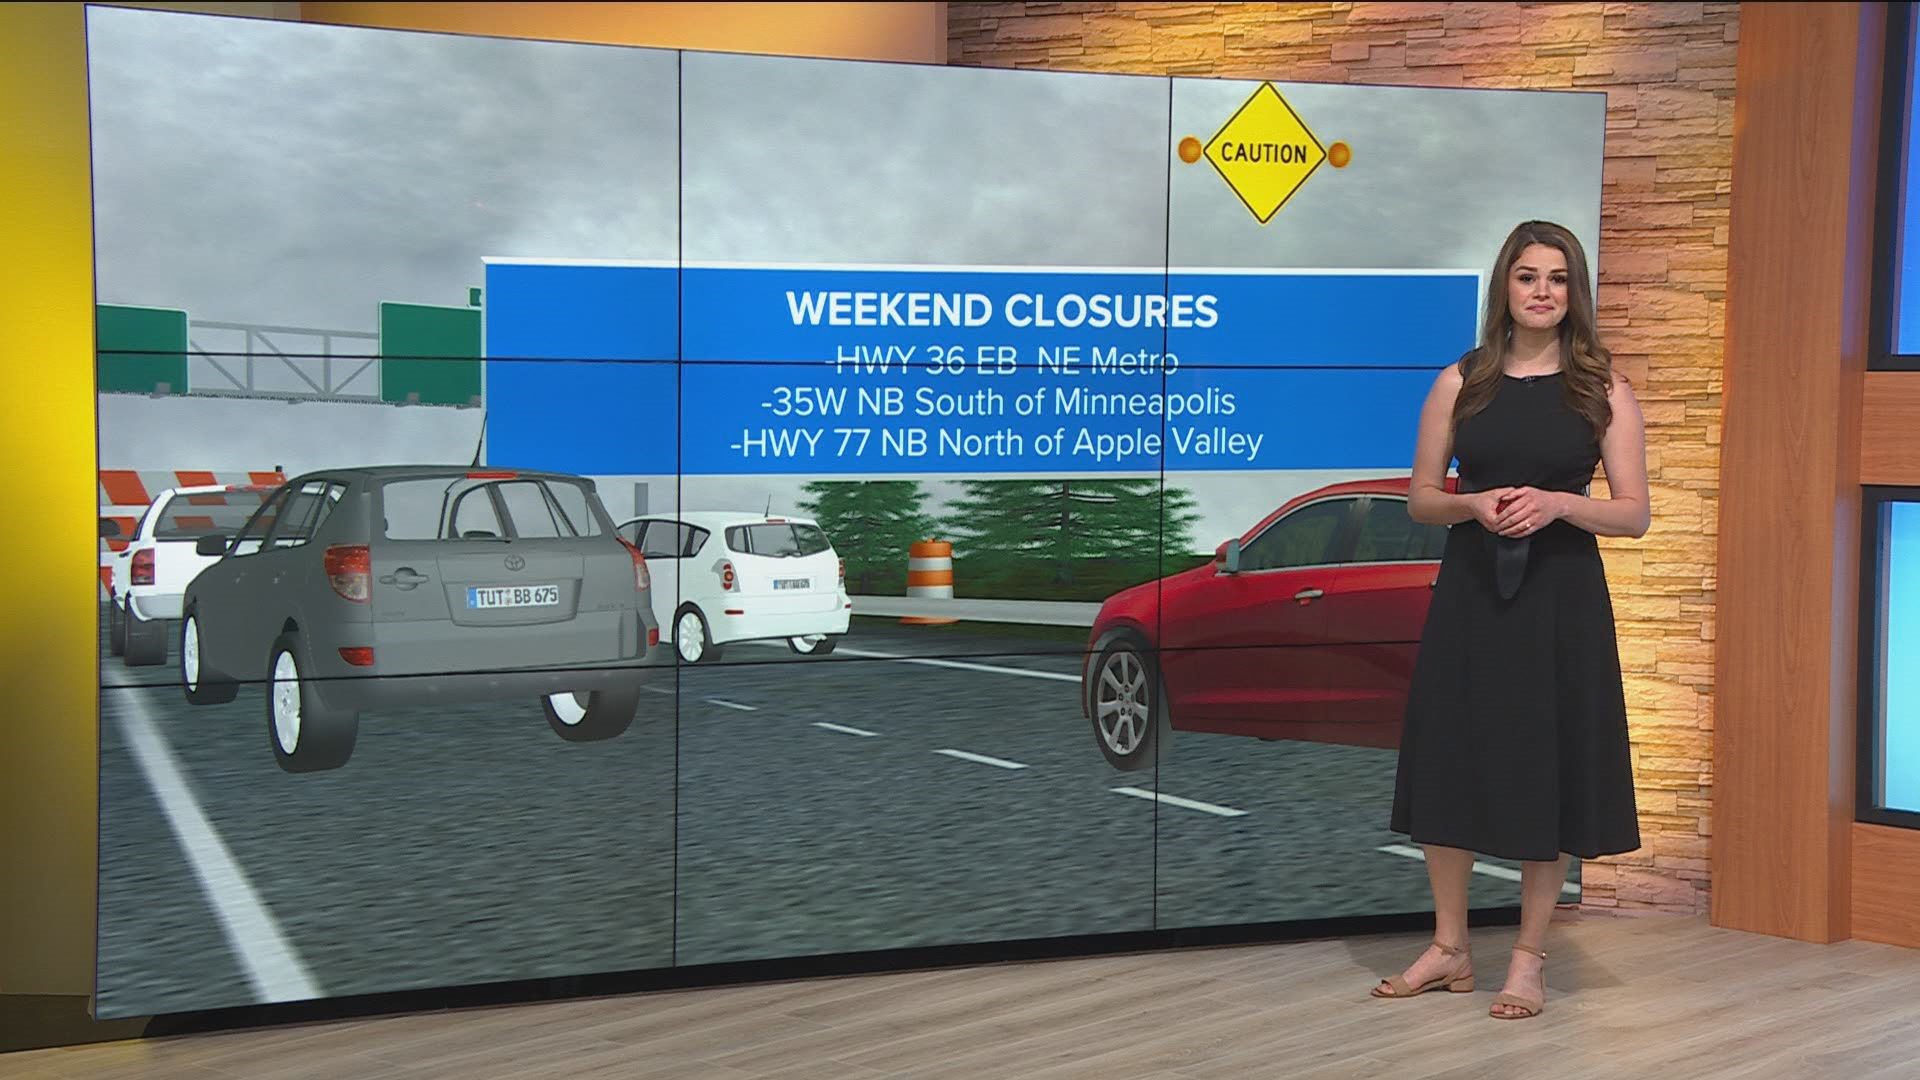 Three big weekend road closures could snarl your plans if you don't plan ahead. KARE 11's Alicia Lewis has more on the traffic hot spots.